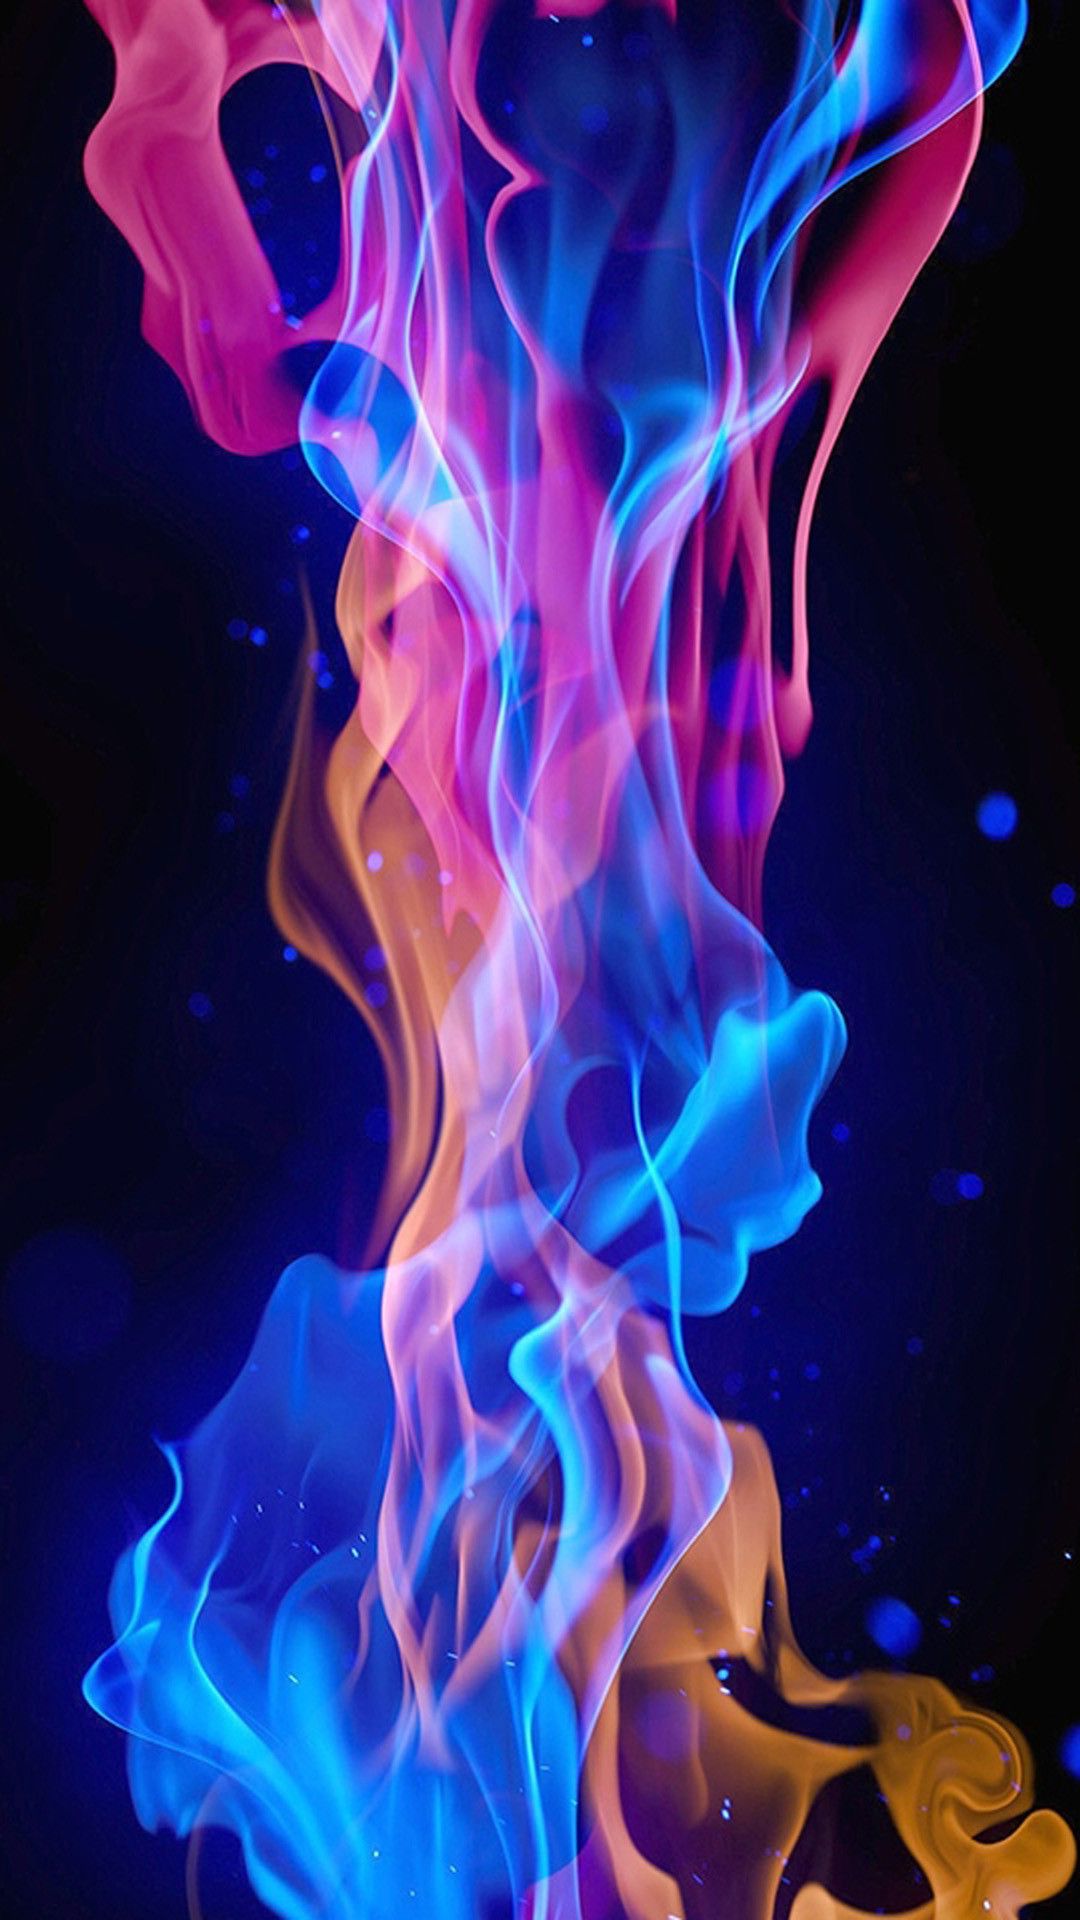 Download wallpaper 1125x2436 colorful smoke, man in mask, iphone x,  1125x2436 hd background, 24731